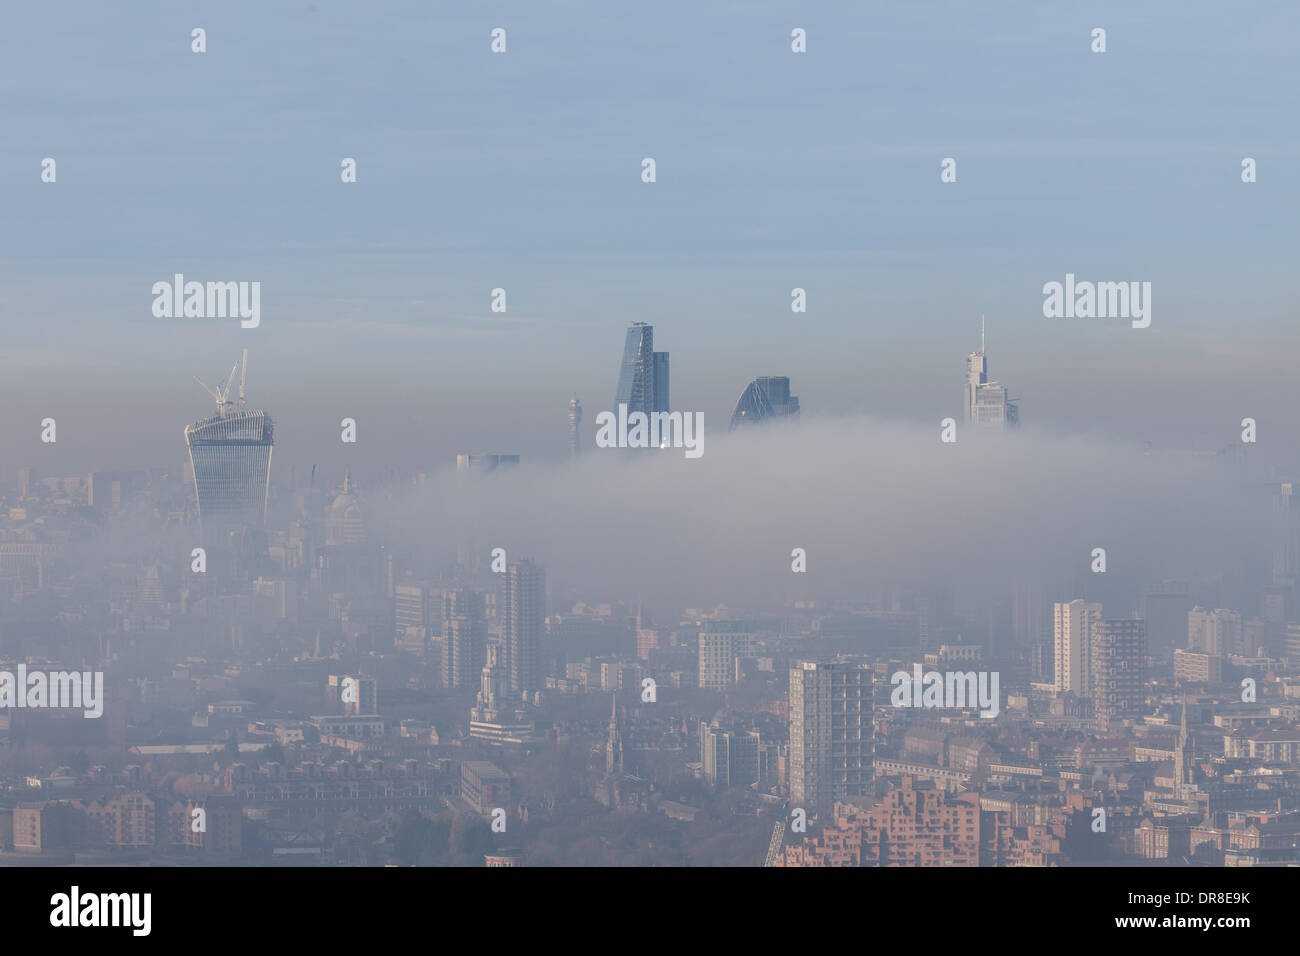 London UK, 21st Jan 2014. The tops of seven of London's tallest buildings are visible above the low fog. From left to right they are: 20 Fenchurch Street (nicknamed 'The Walkie Talkie'), the Willis Building, the BT Tower, 122 Leadenhall Street (nicknamed 'The Cheesegrater'), 30 St Mary Axe (nicknamed 'The Gherkin') with Tower 42 just behind, and the Heron Tower. This was shot from Canary Wharf to the East. © Steve Bright/Alamy Live News Credit:  Steve Bright/Alamy Live News Stock Photo